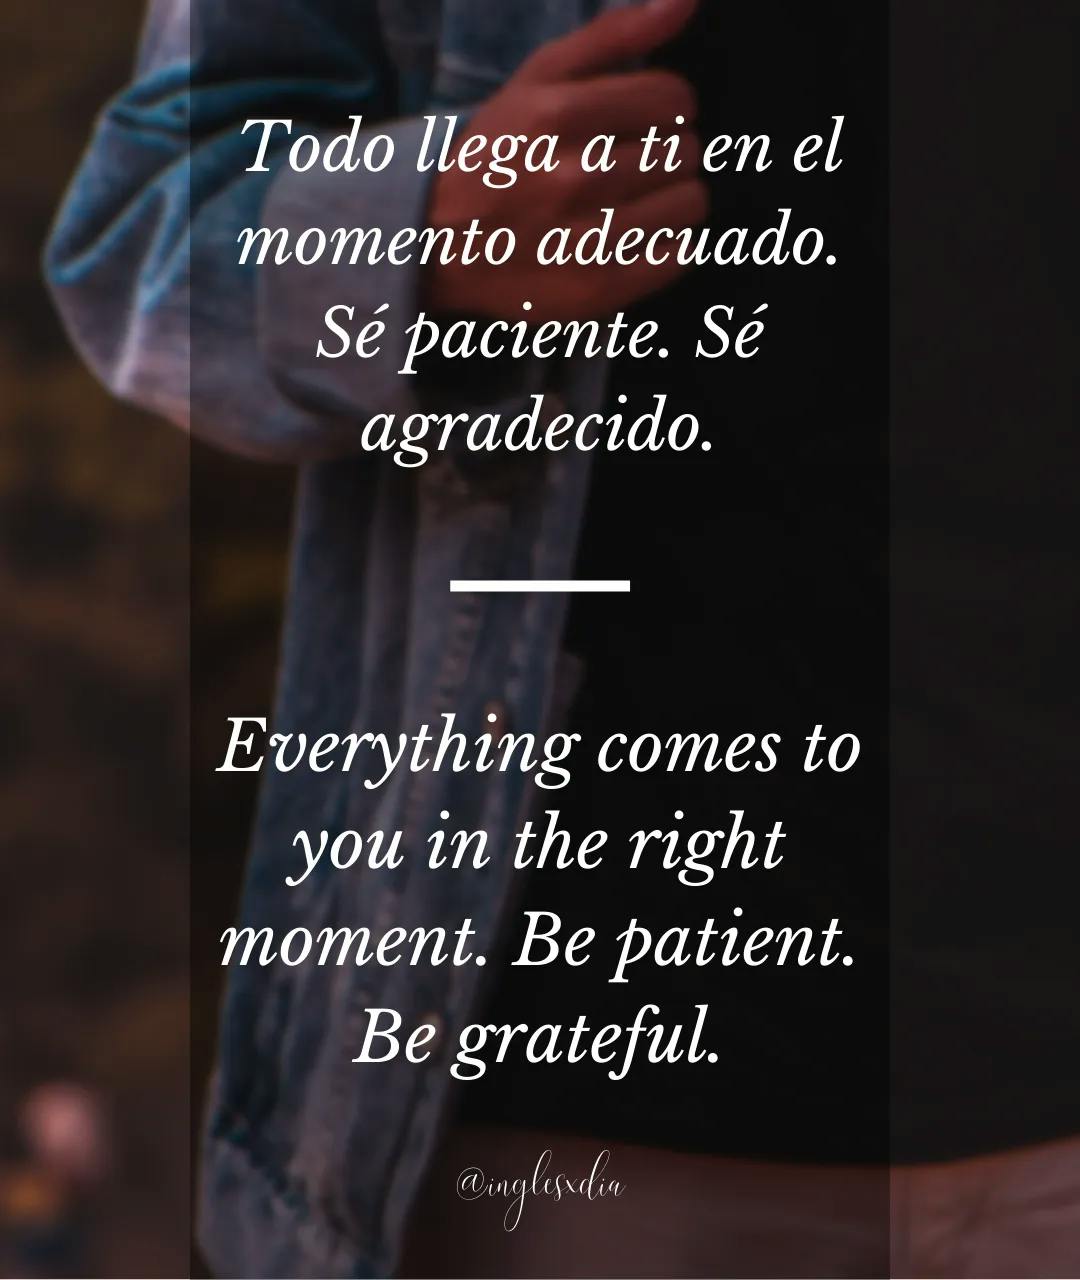 Frases motivadoras en inglés: Everything comes to you in the right moment. Be patient. Be grateful.